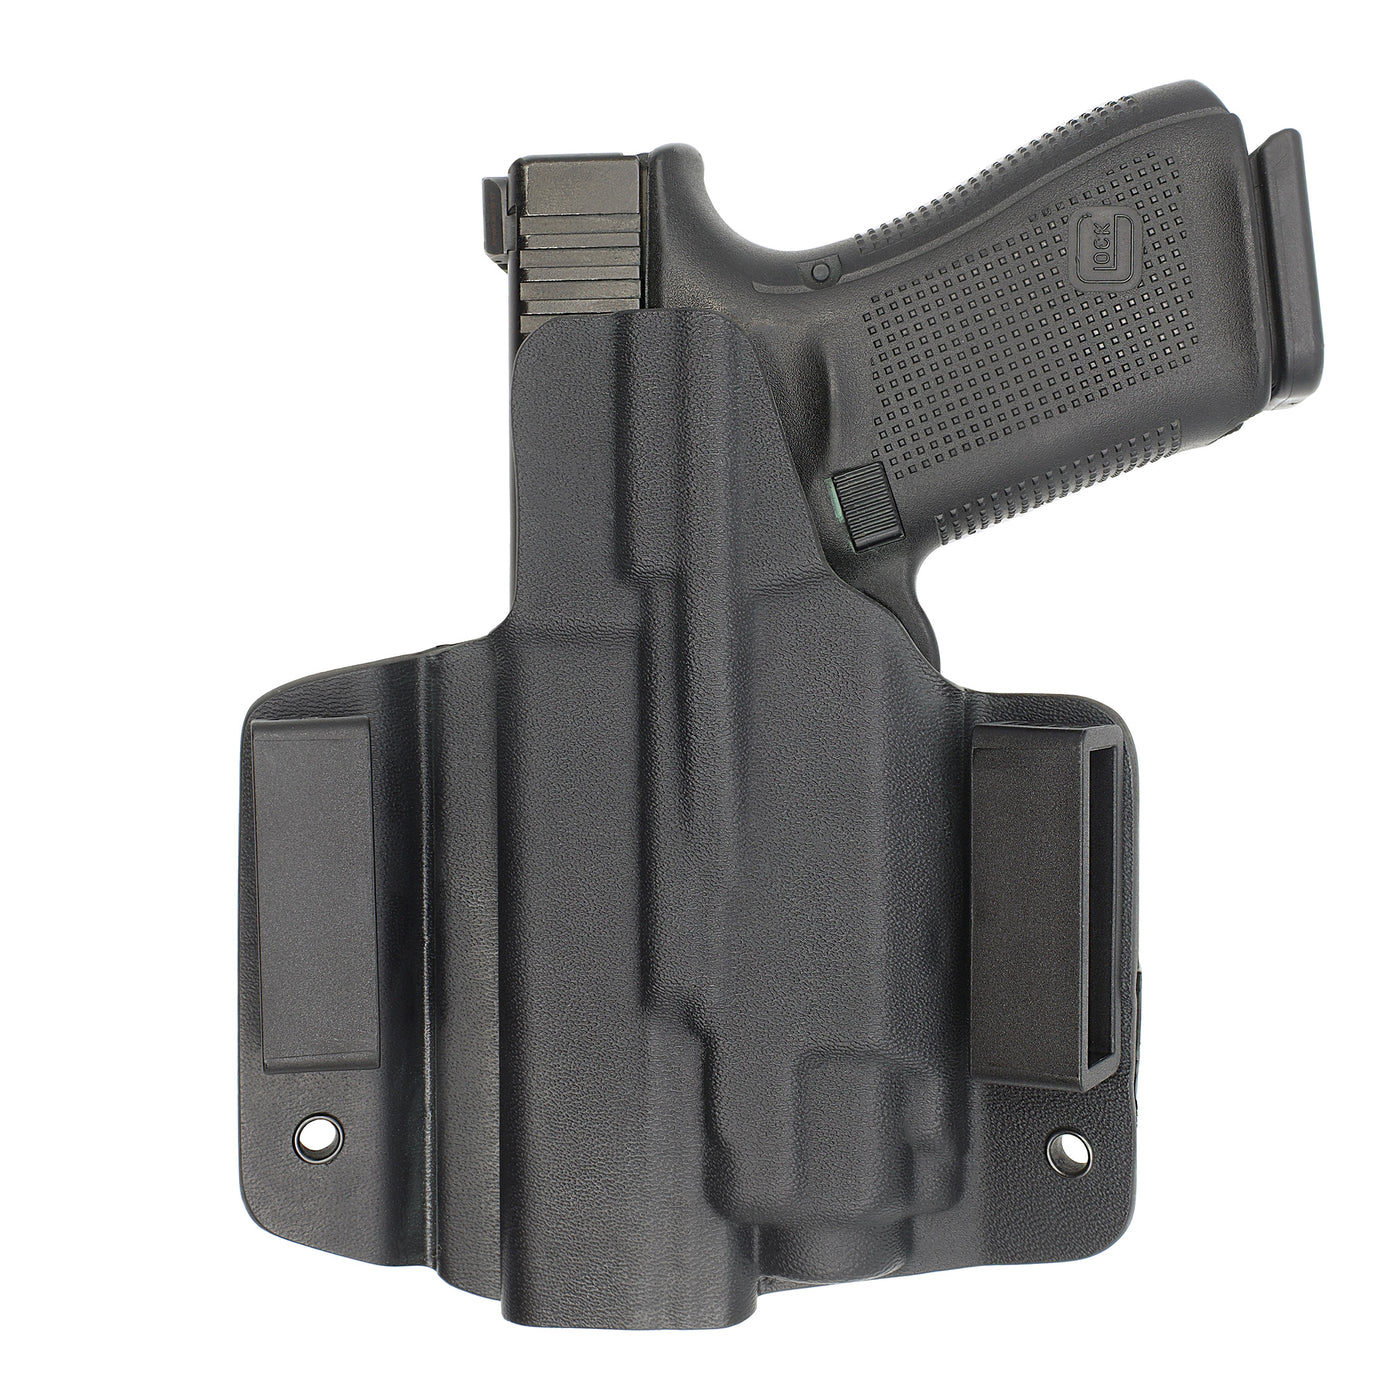 C&G Holsters quickship OWB tactical Glock 29/30 streamlight TLR8 holstered back view